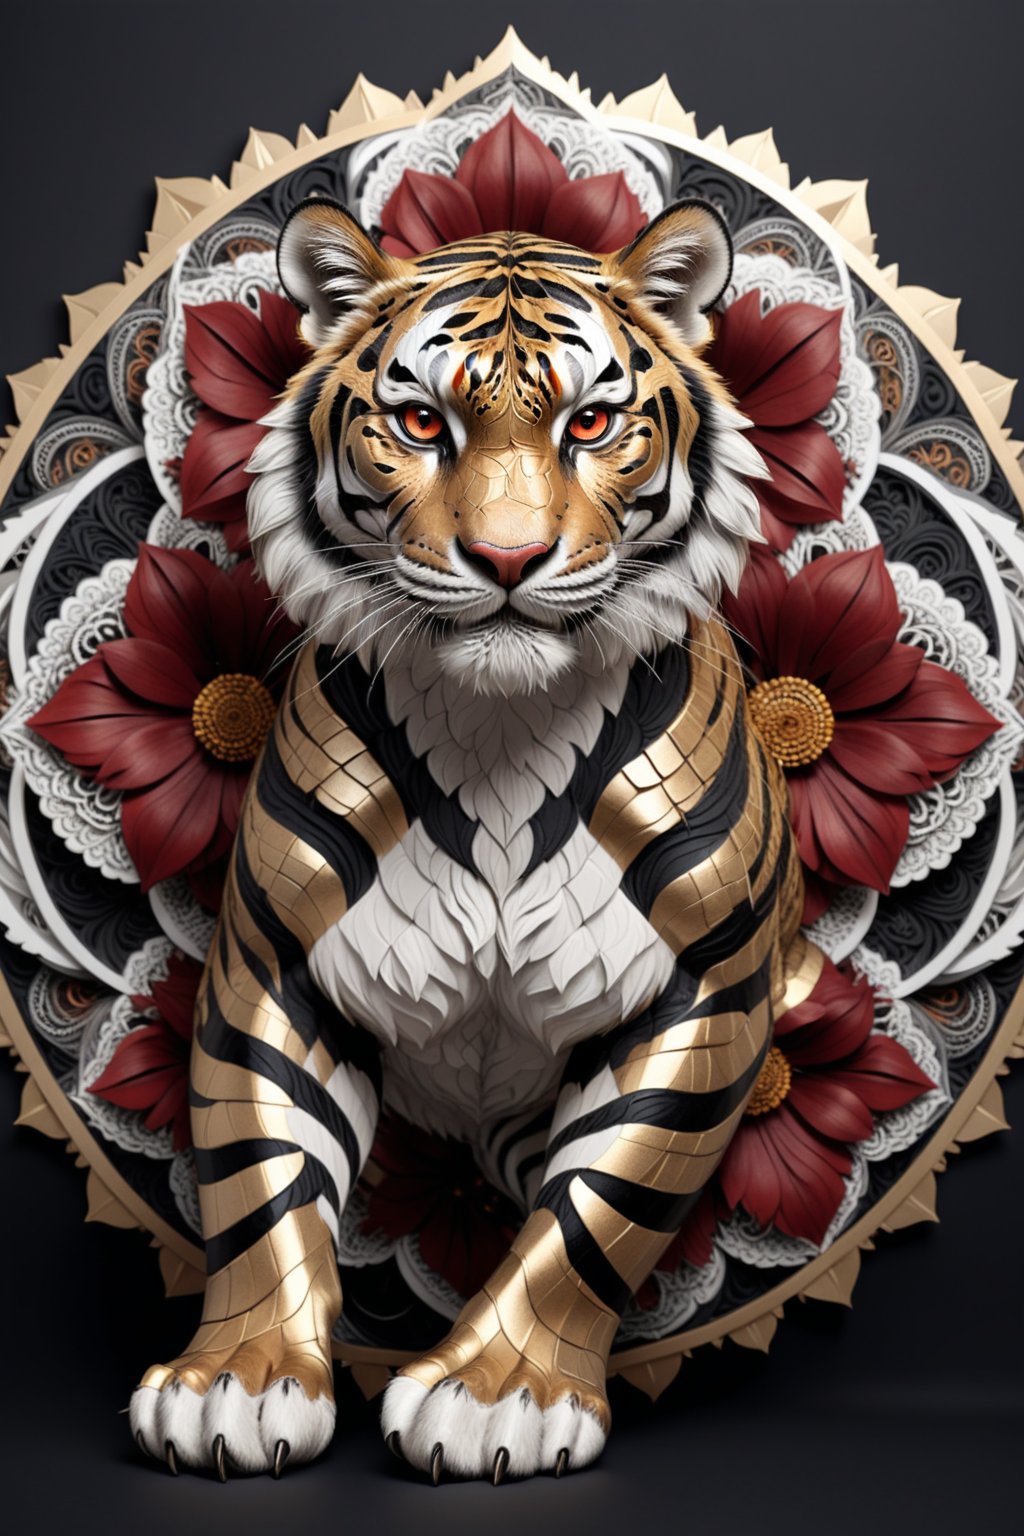 Official Art, Unity 8K Wallpaper, Super Detailed, Beautiful and Aesthetic, Masterpiece, Top Quality, (Zentangle, Mandala, Tangle, Tangle), (Fractal Art: 1.3), One tiger, Highly Detailed, Dynamic Angle,{{{ full body shot}}}, the most beautiful form chaos, elegant, brutalist design, bright Gold, Silver, Bronze, Black, Deep Red, romanticism